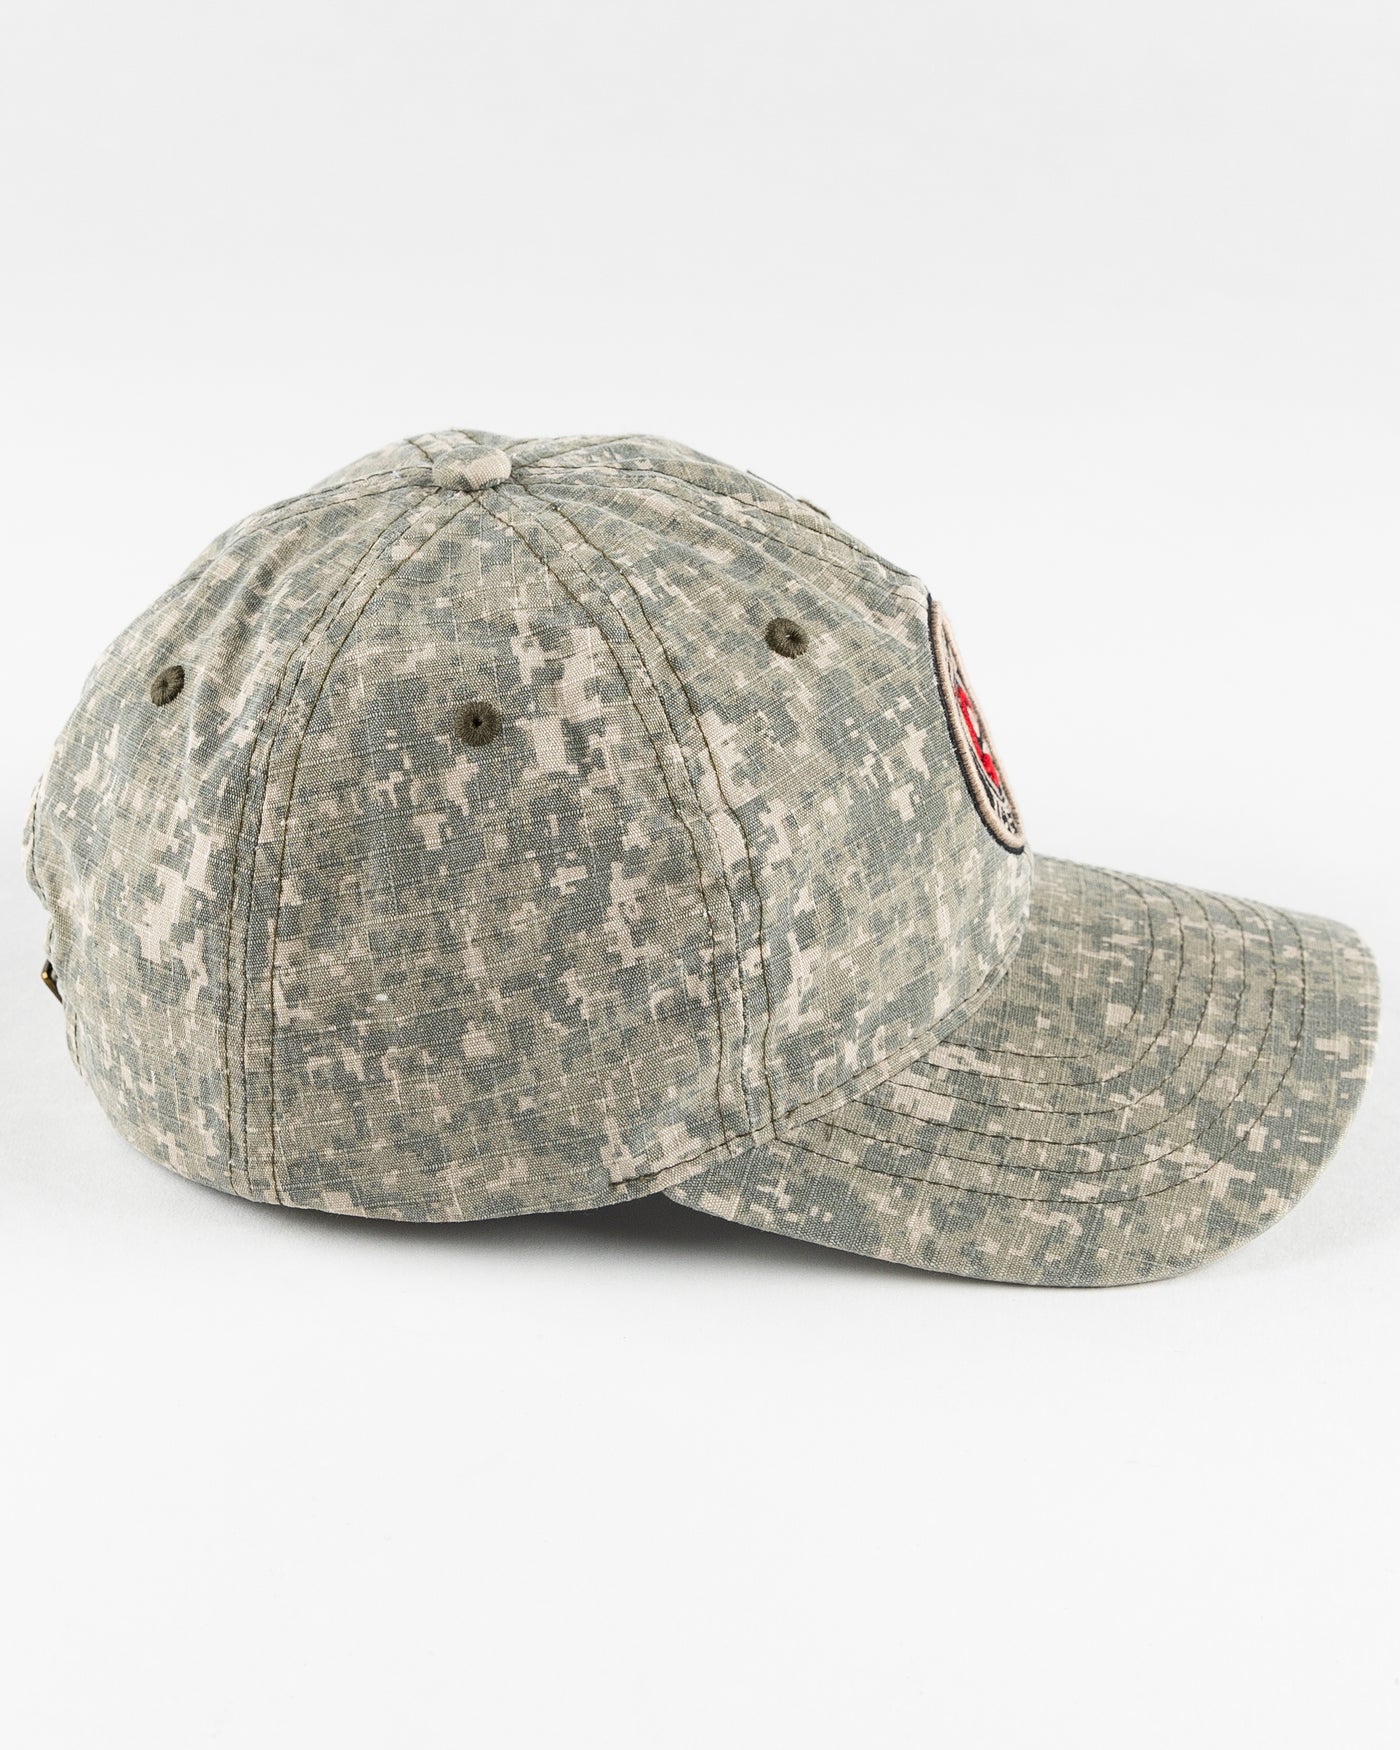 camo Rockford IceHogs adjustable cap with patch embroidered on front - right side lay flat